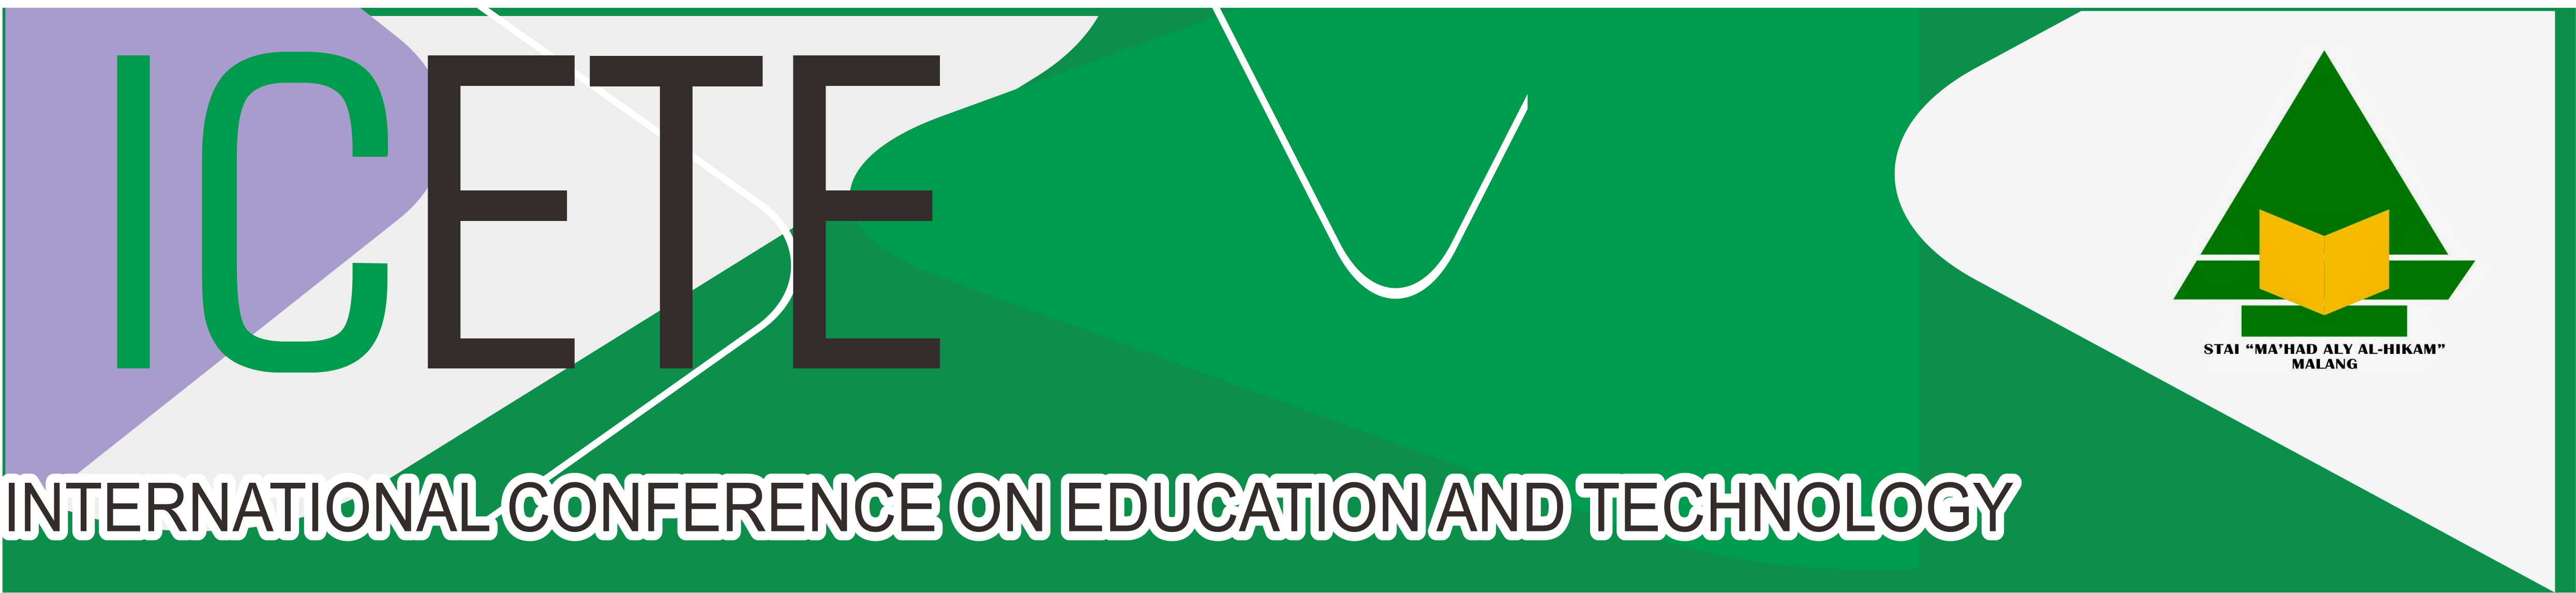 ICETE: International Conference On Education And Technology